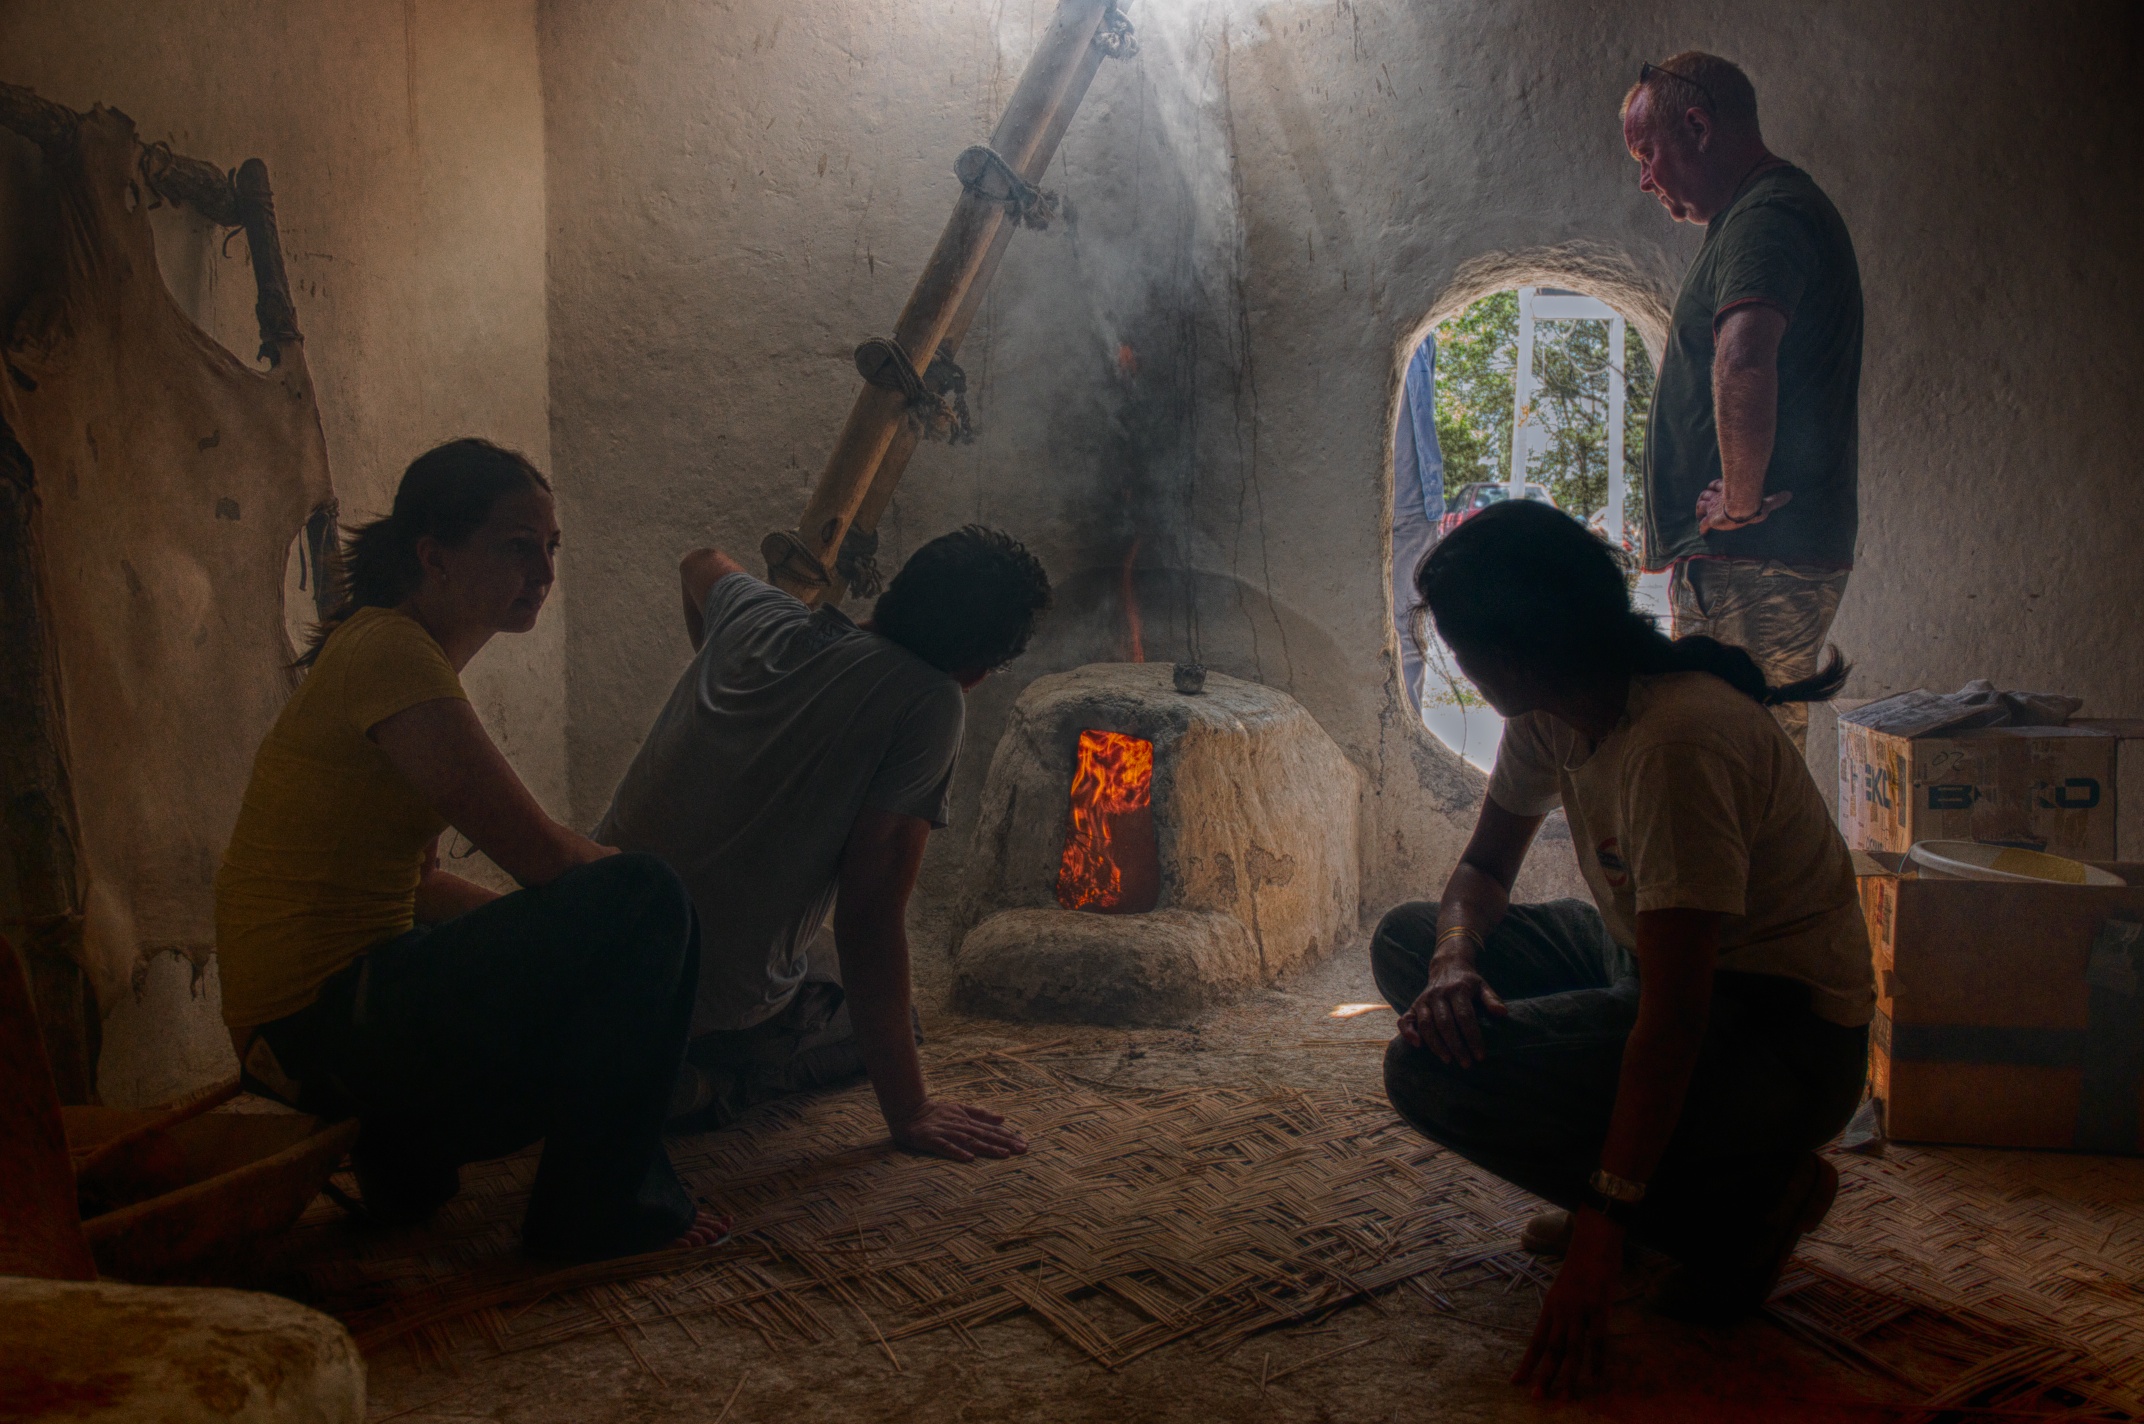  Testing Neolithic oven fire and smoke conditions in the Experimental House at Çatalhöyük, Turkey. 